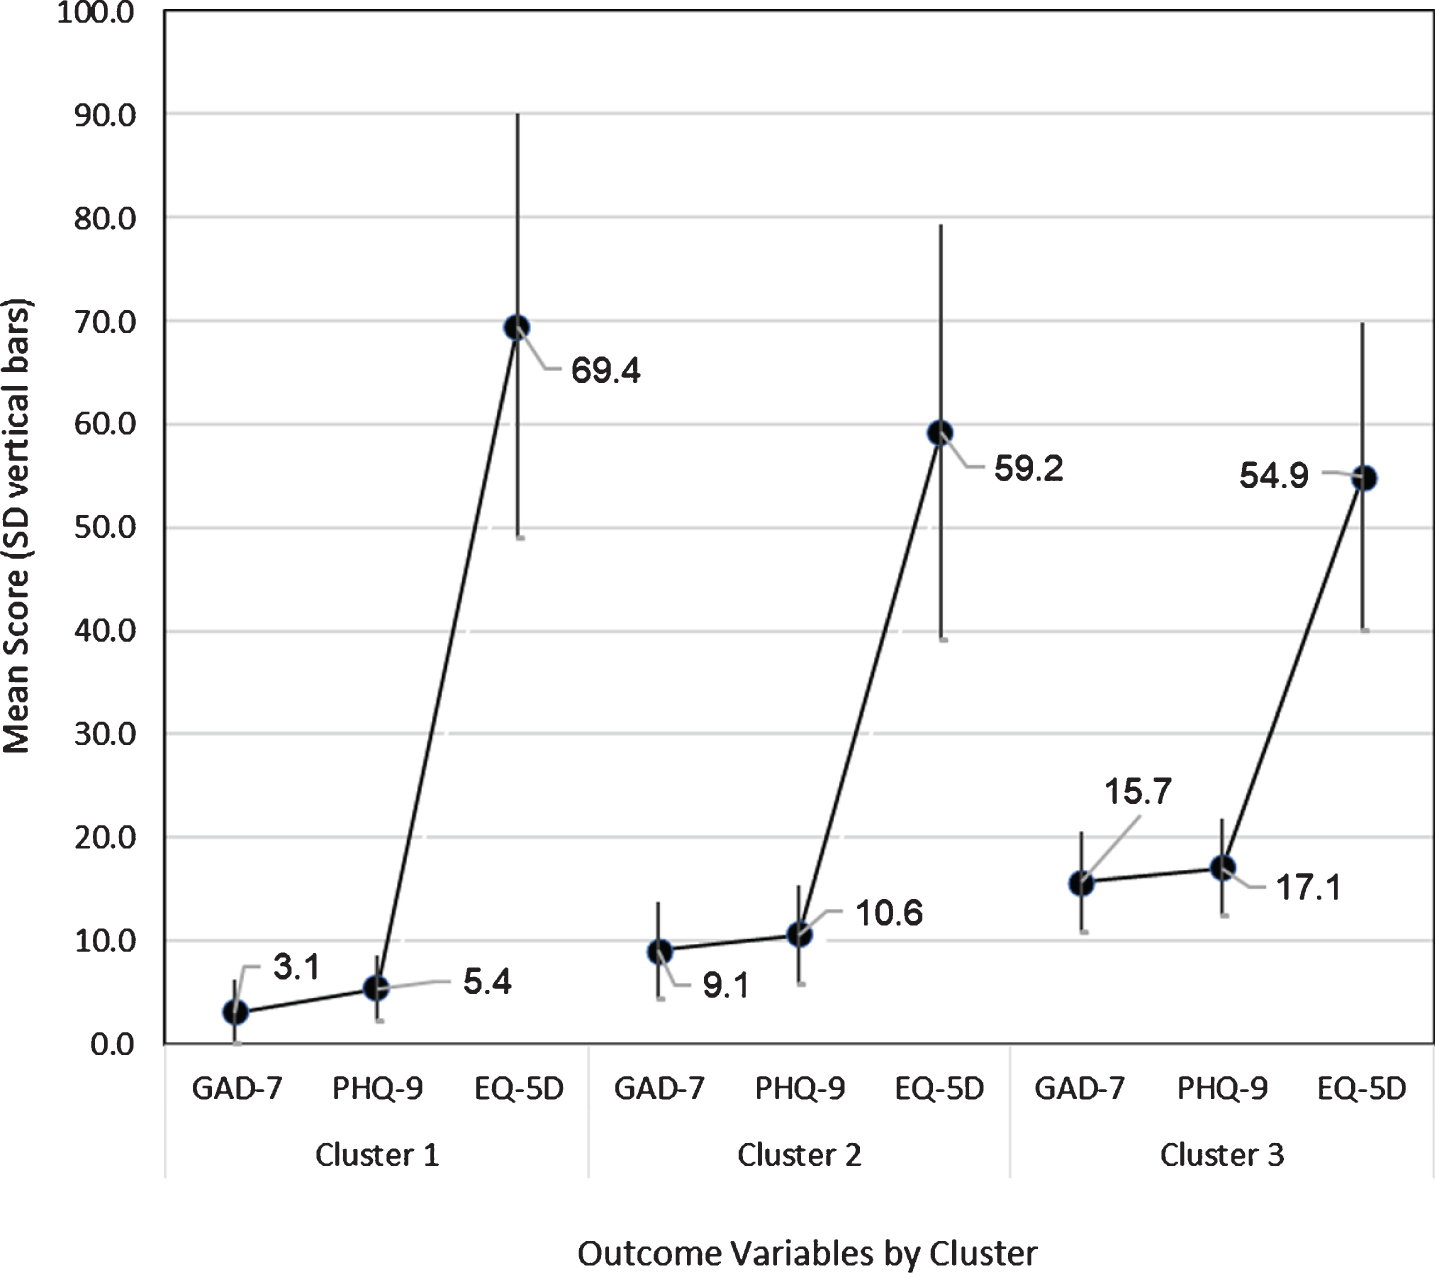 Two-step cluster subgroups with mean score and standard deviation (y-axis) for outcome variables (x-axis). Note: GAD-7 = Generalized Anxiety Disorder 7-item; PHQ-9 = Patient Health Questionnaire 9 item.